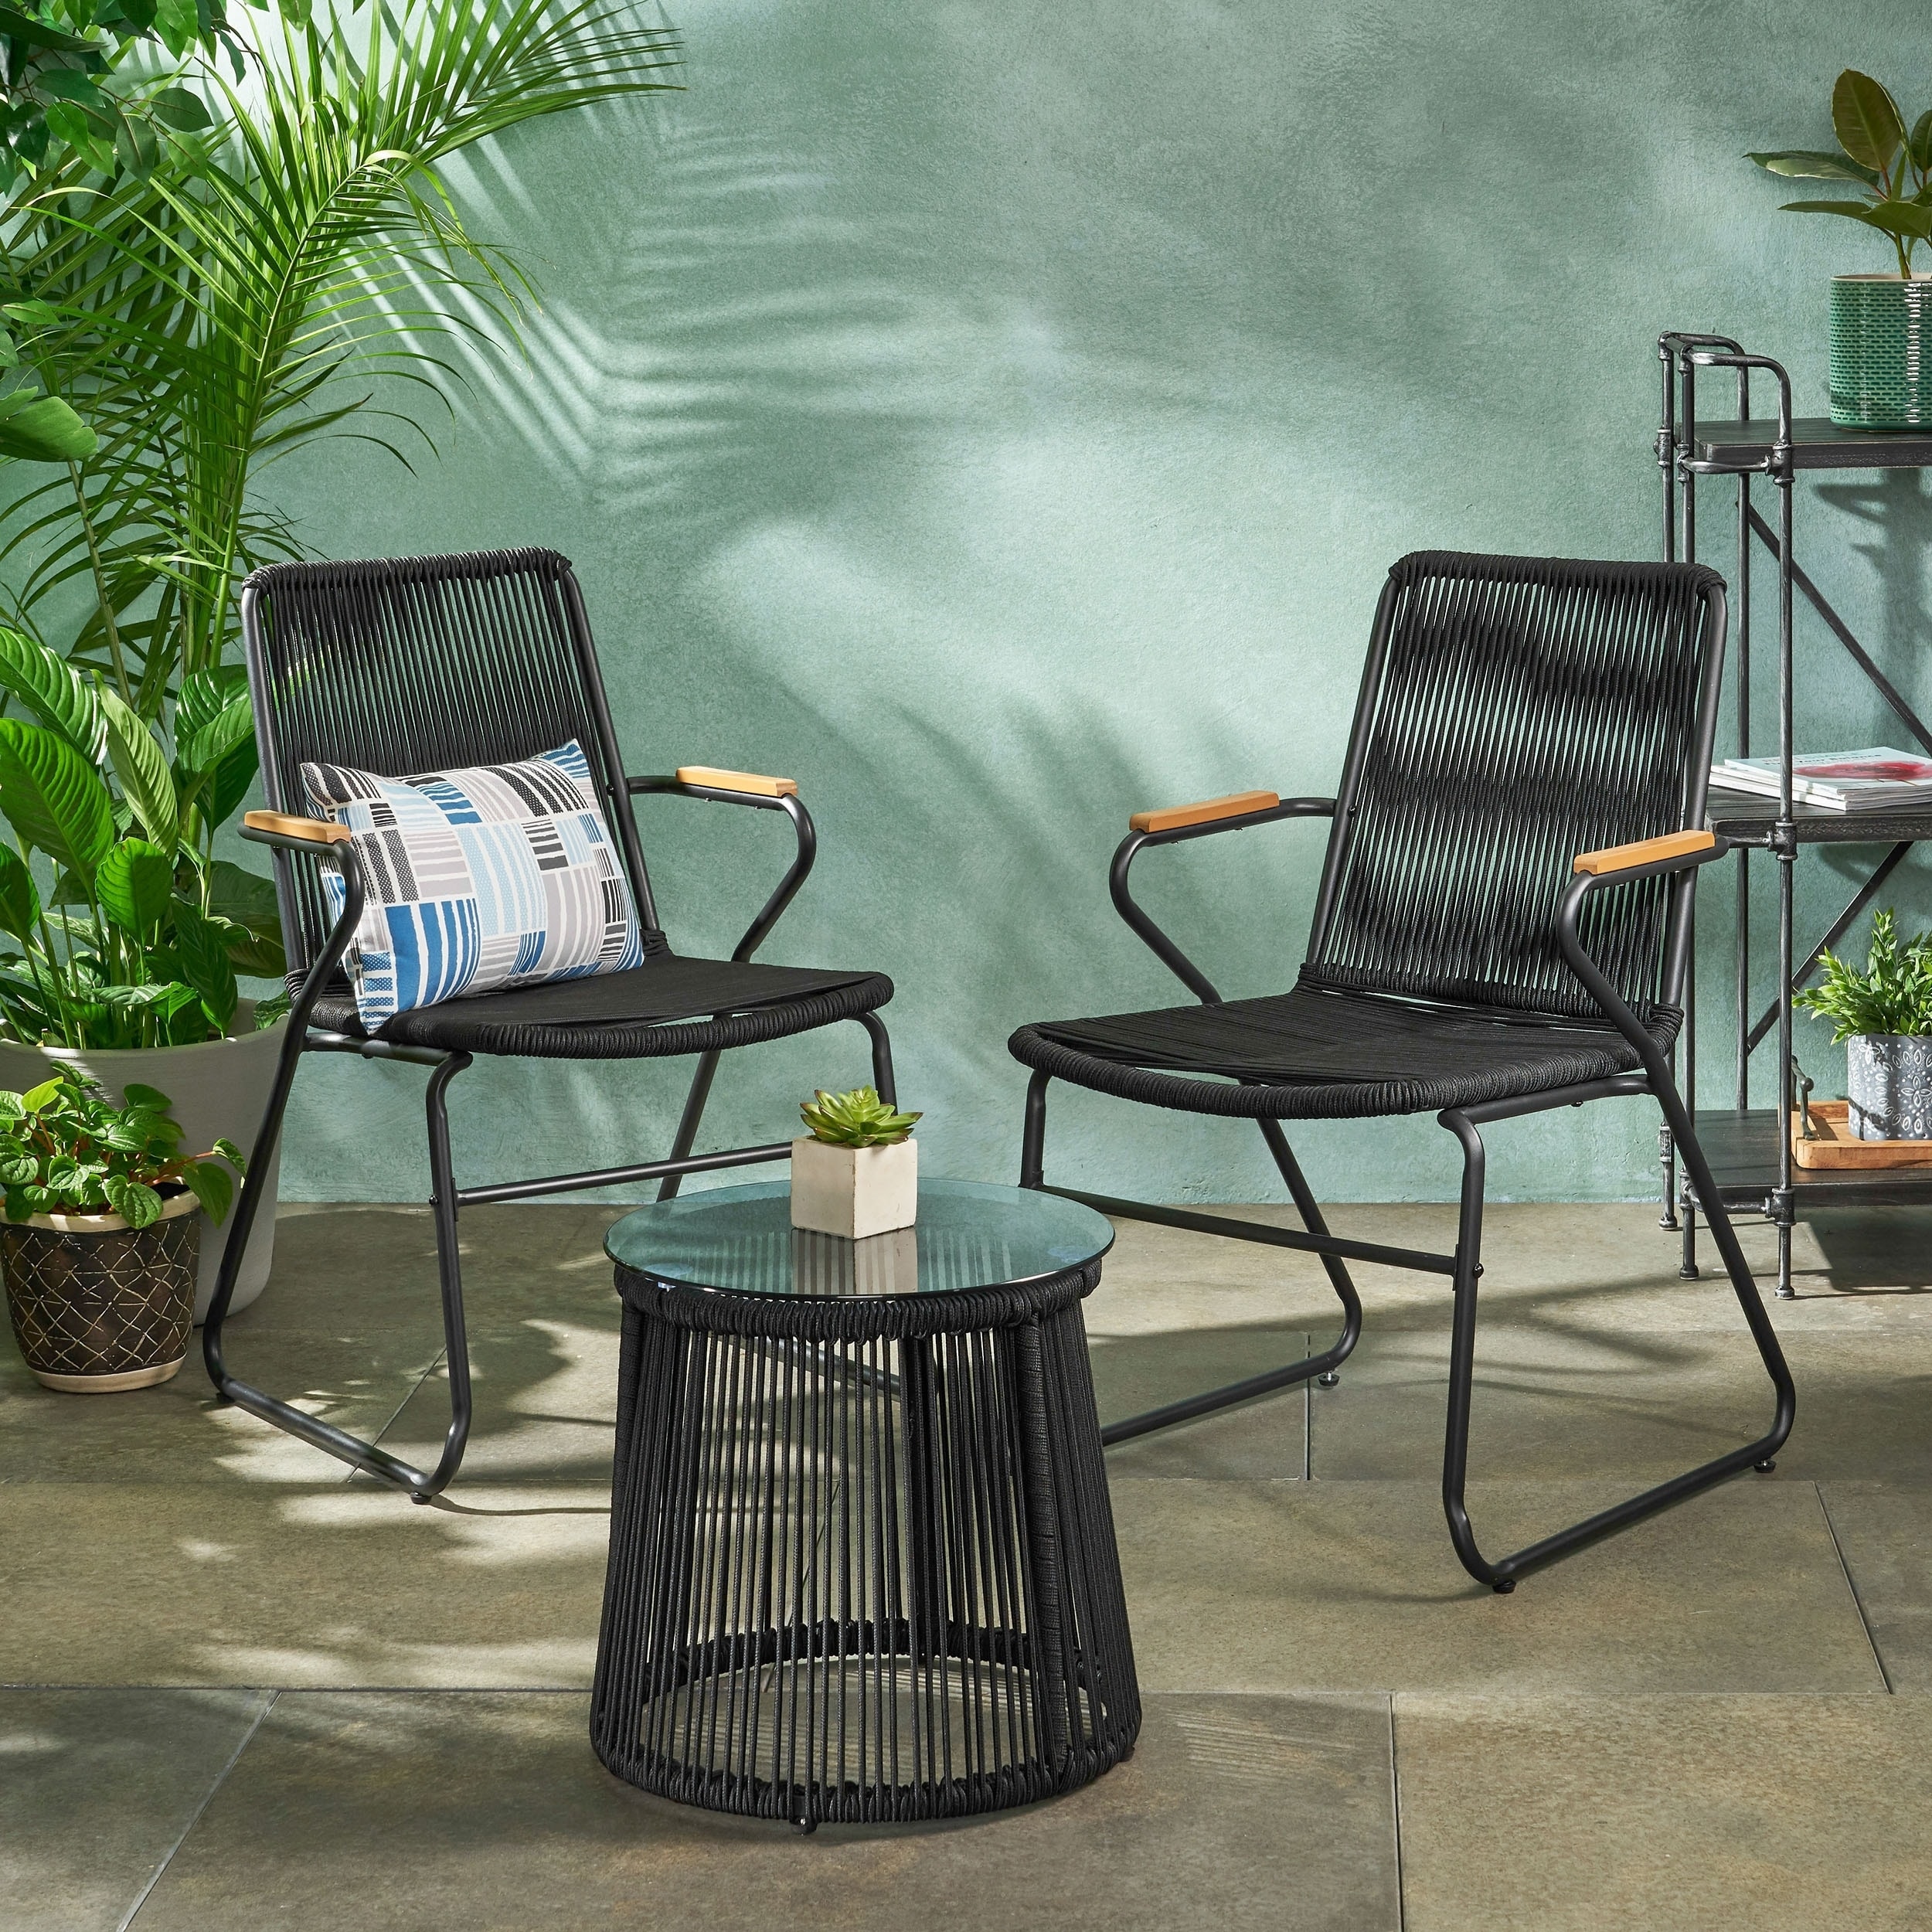 https://ak1.ostkcdn.com/images/products/30027147/Moonstone-Modern-Outdoor-Rope-Weave-Chat-Set-with-Side-Table-by-Christopher-Knight-Home-c4a1bbe3-3610-4f90-9cda-09491df7f371.jpg